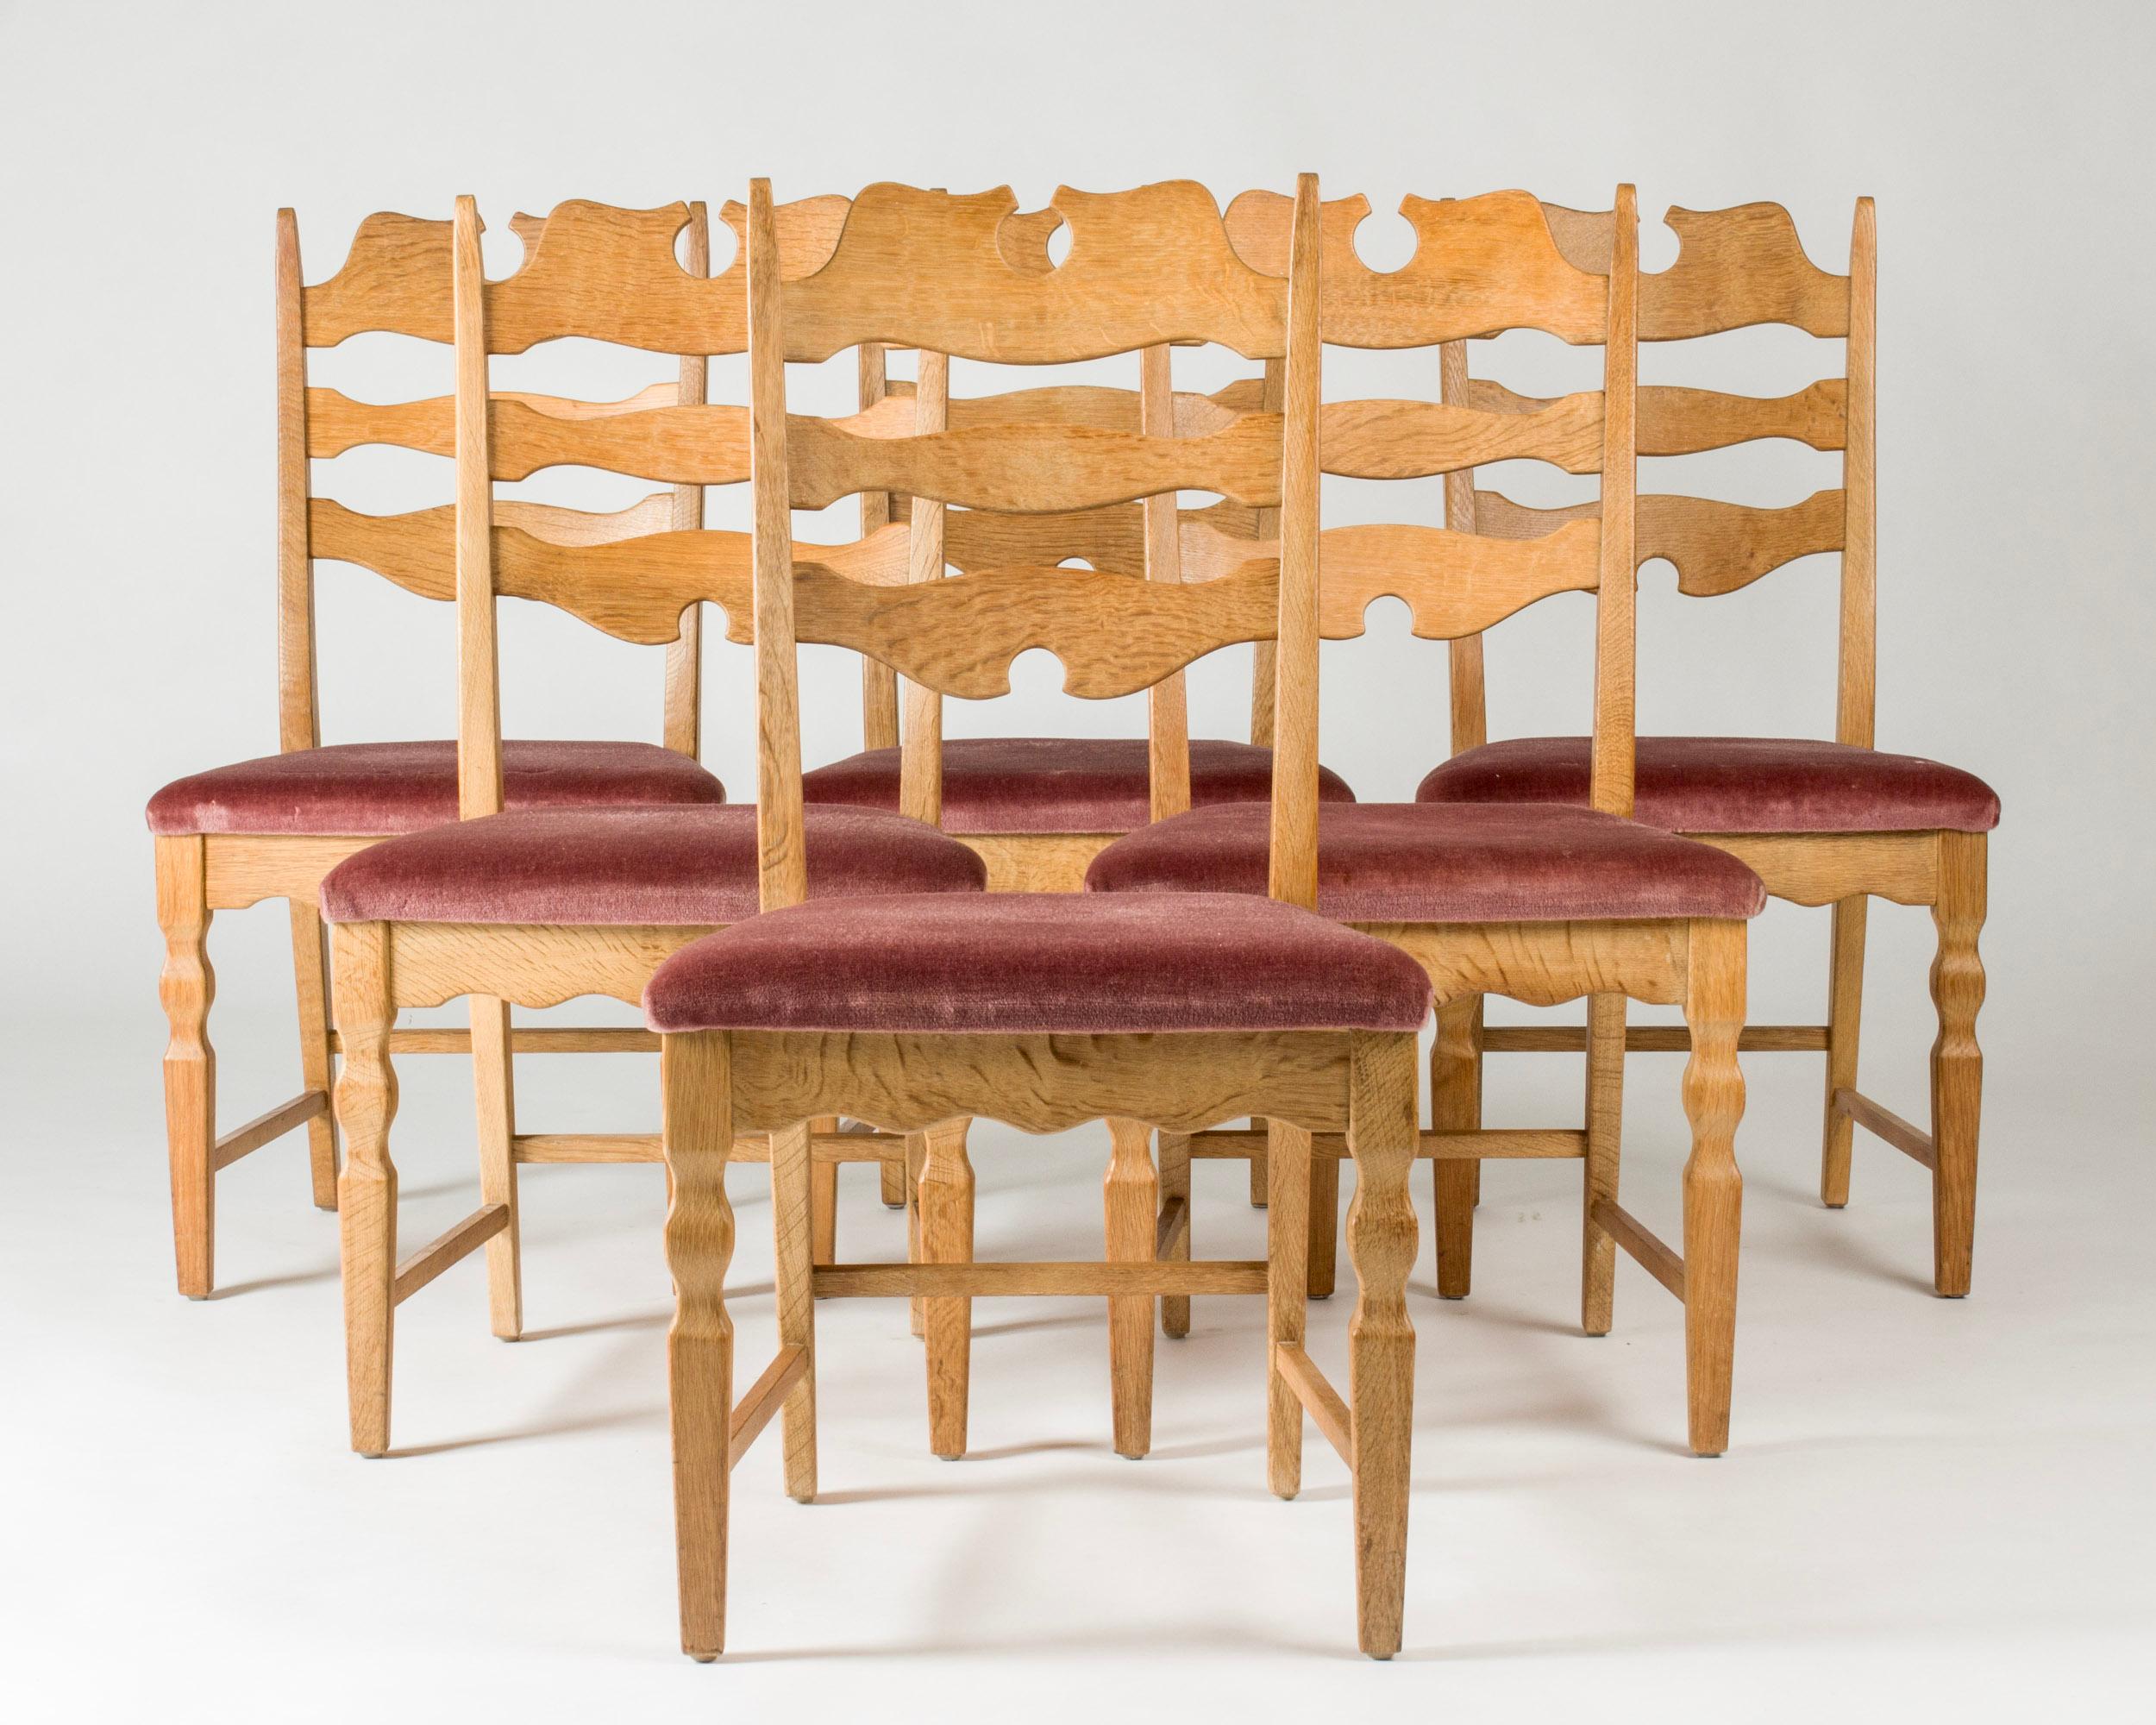 Set of six elegant dining chairs by Henning Kjærnulf, model called “Razorblade” from the cool sculpted design of the backs. Made from oak in a rustic design, seats in dusty pink velvet. Produced by EG Møbler.